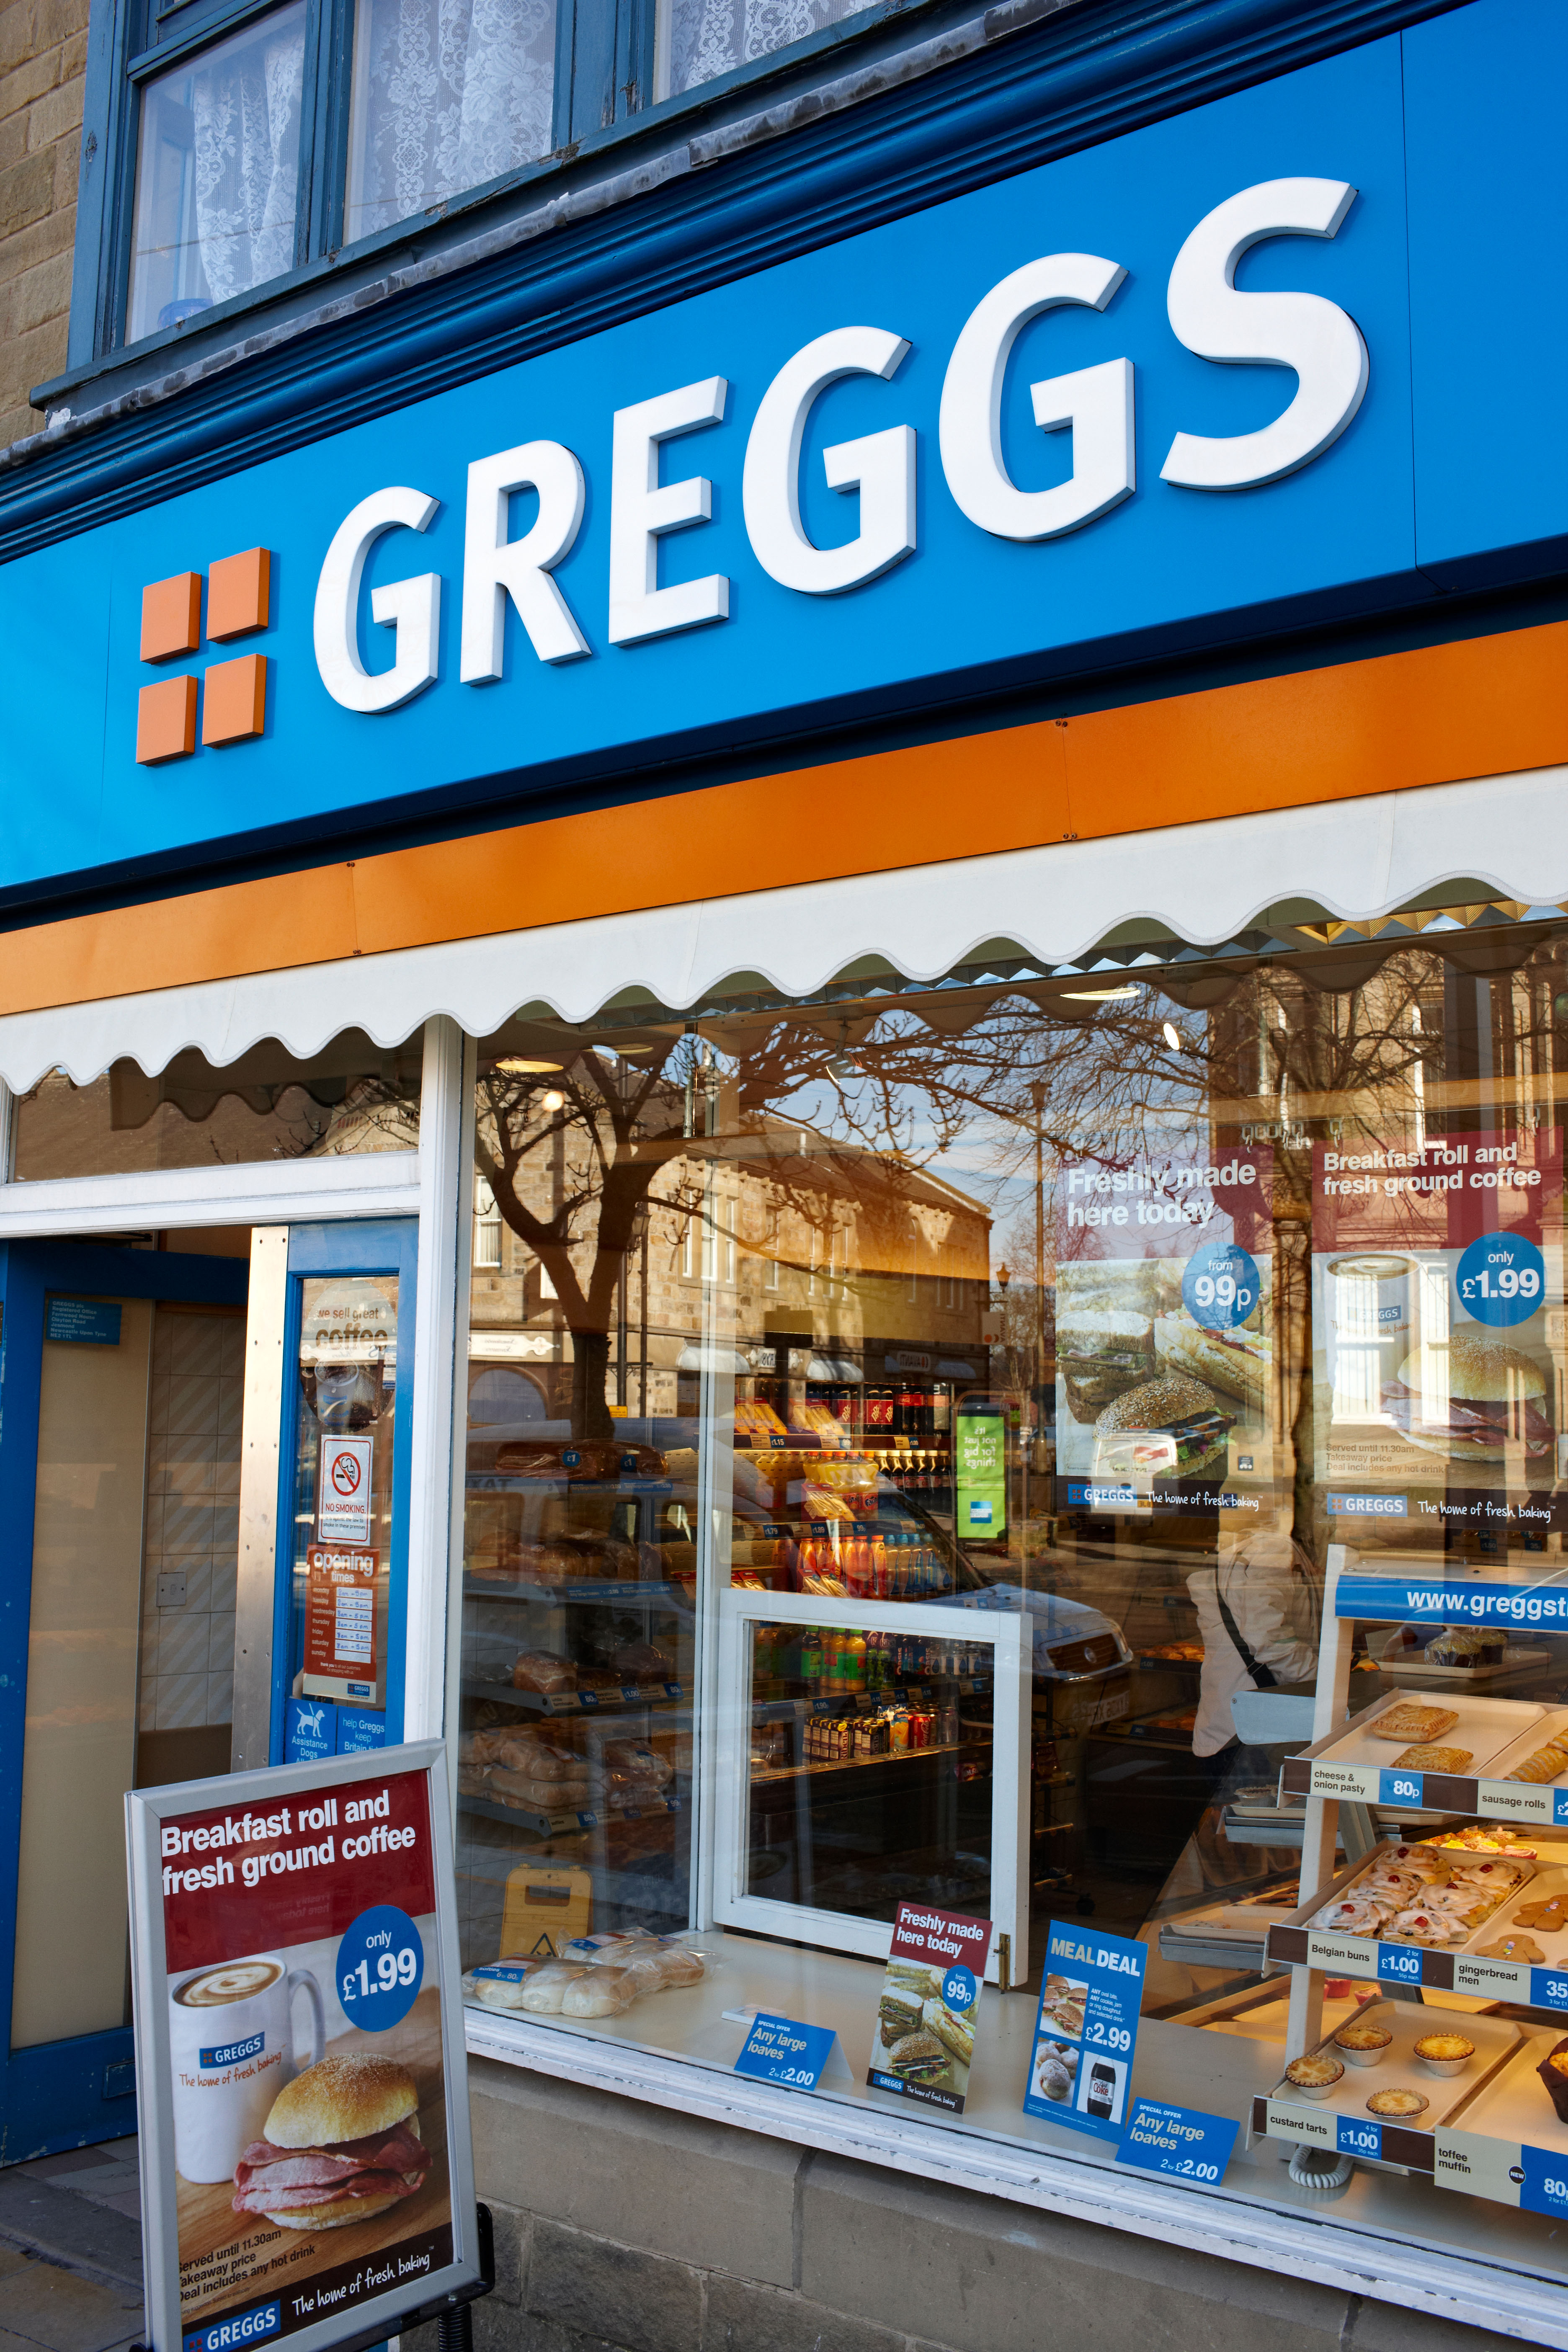 Greggs has abruptly closed a store in Reading this weekend